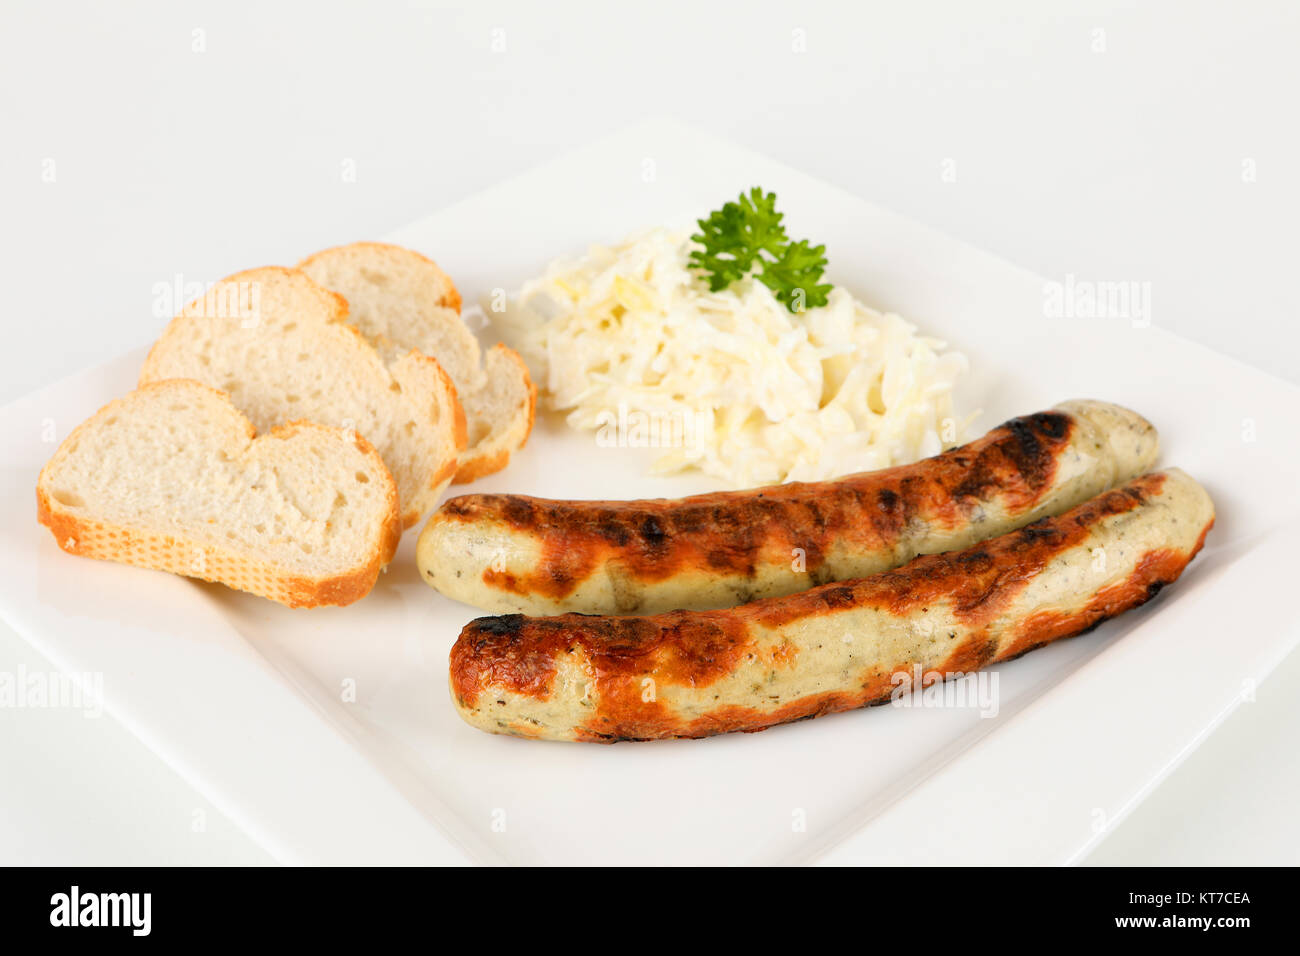 grilled sausage with coleslaw Stock Photo